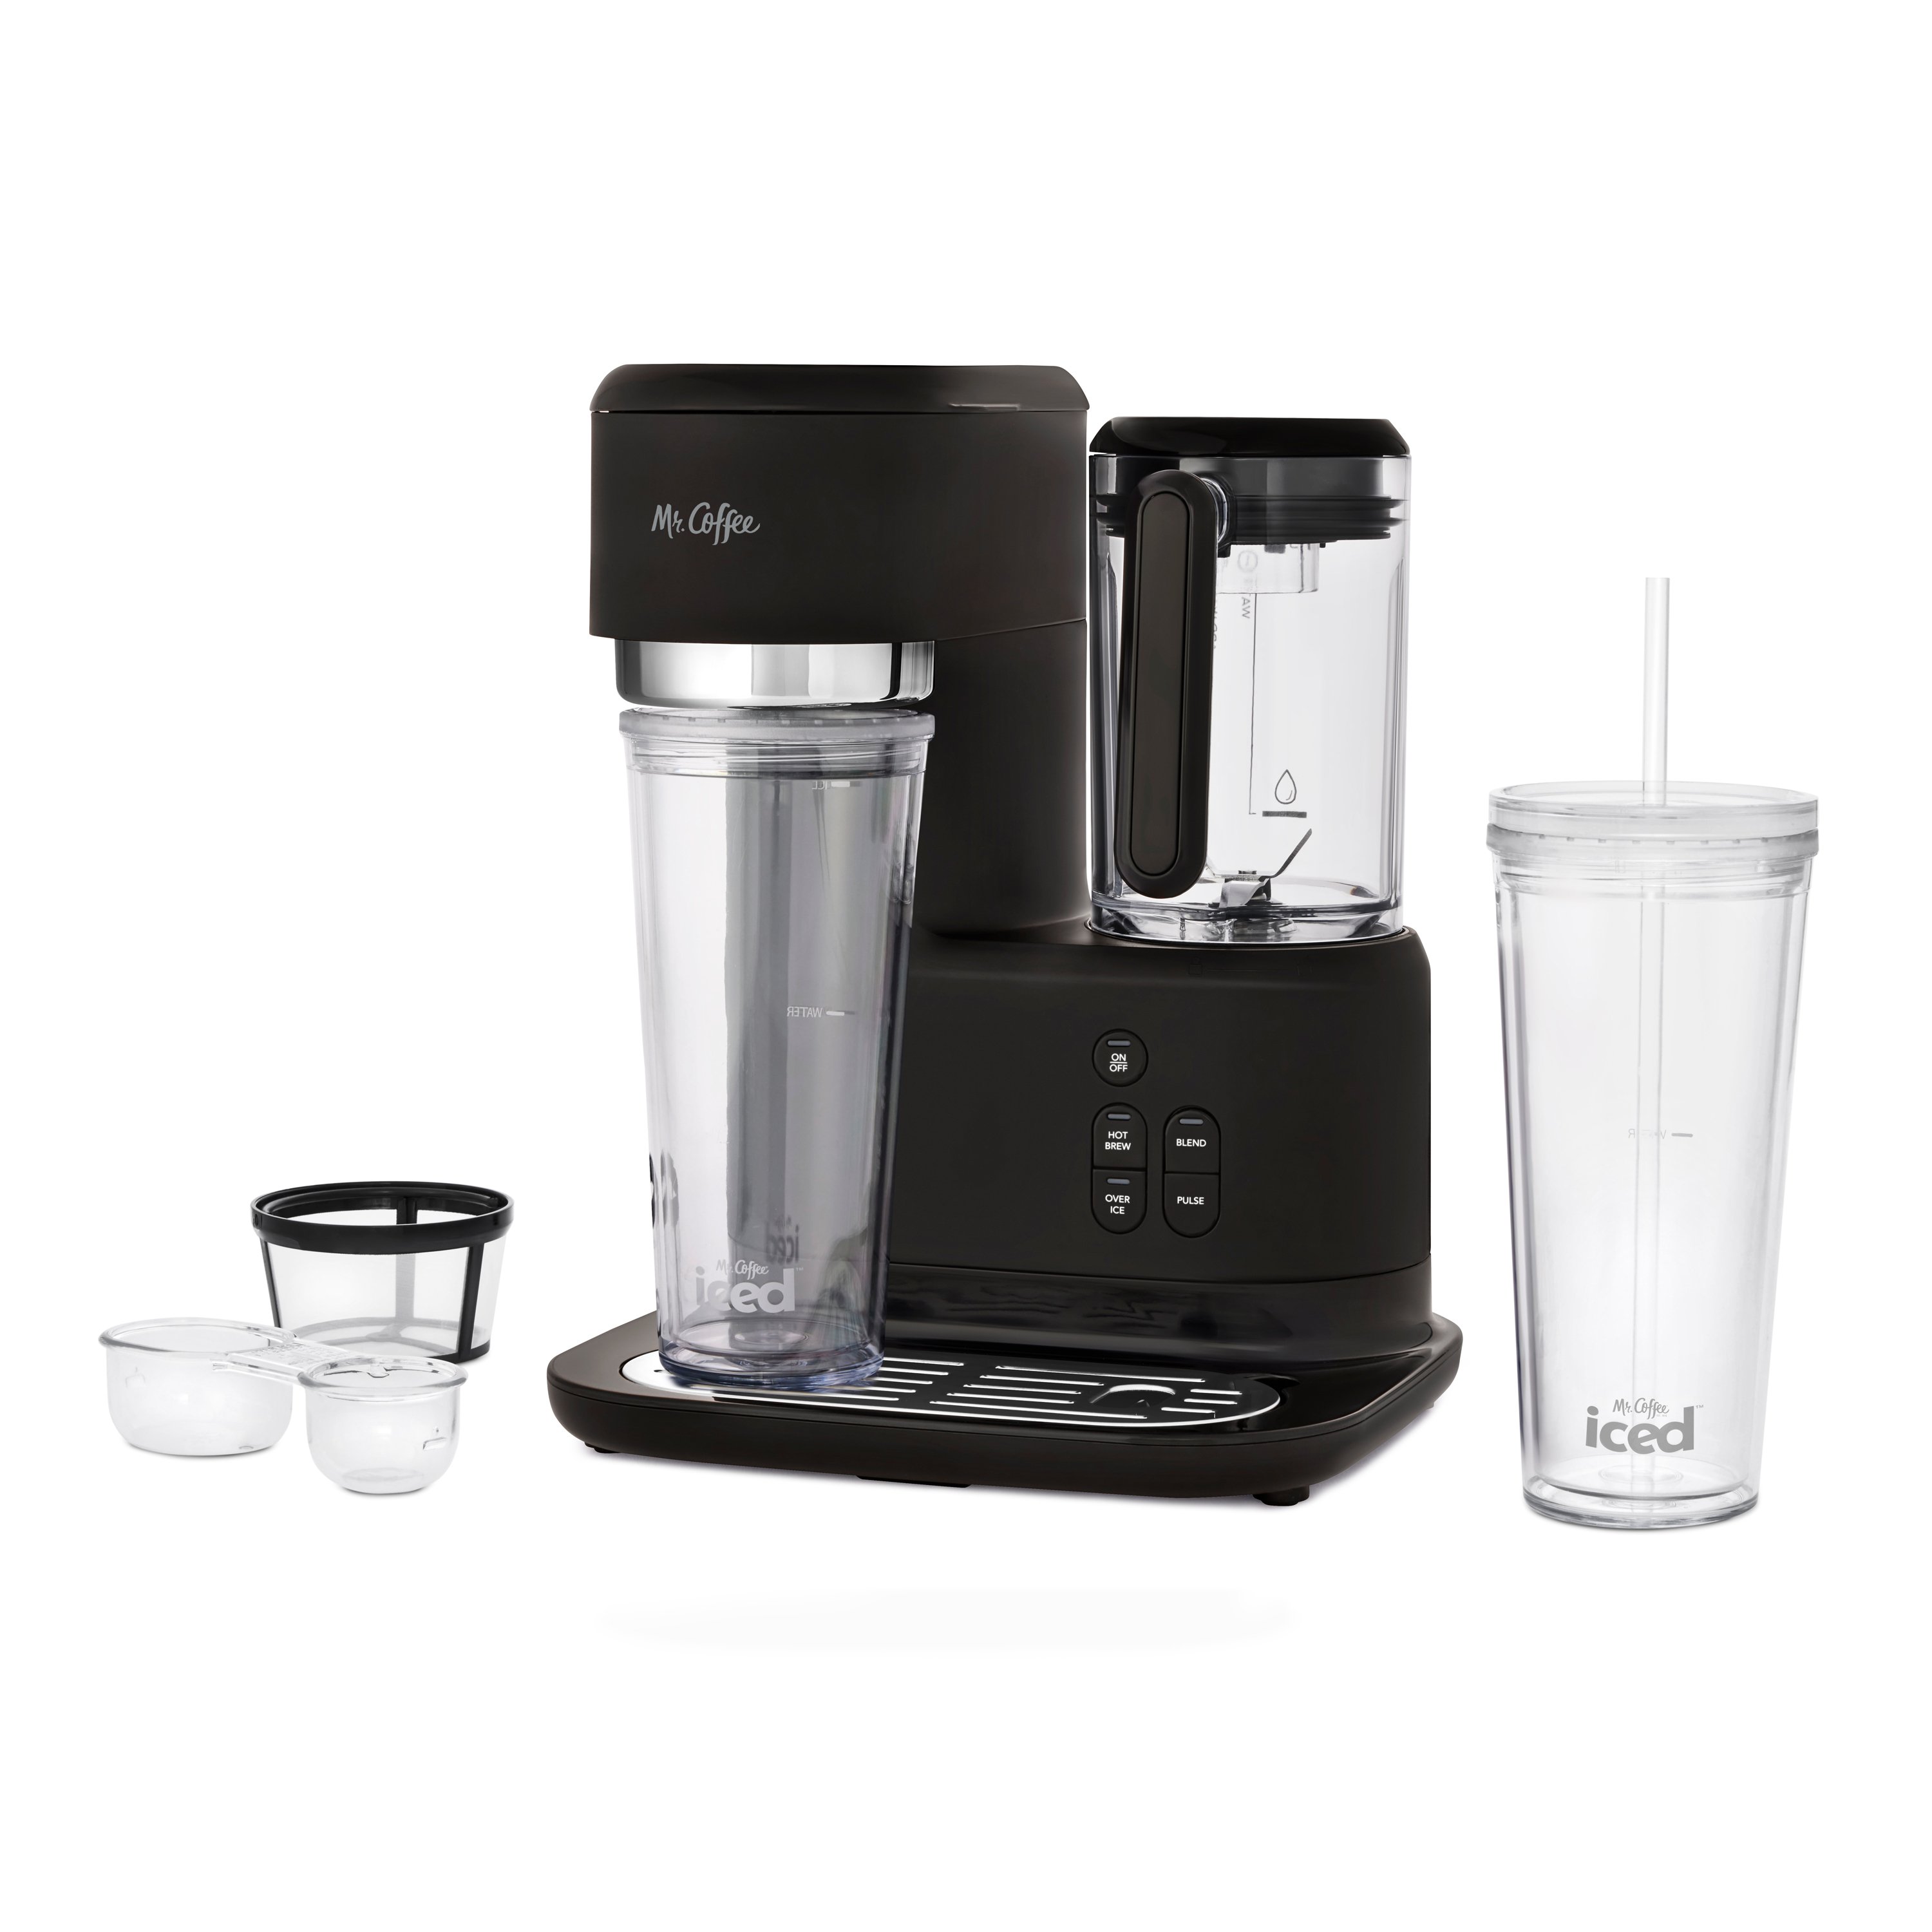 Mr. Coffee® Single-Serve Frappe™, Iced, and Hot Coffee Maker and Blender |  Mr. Coffee